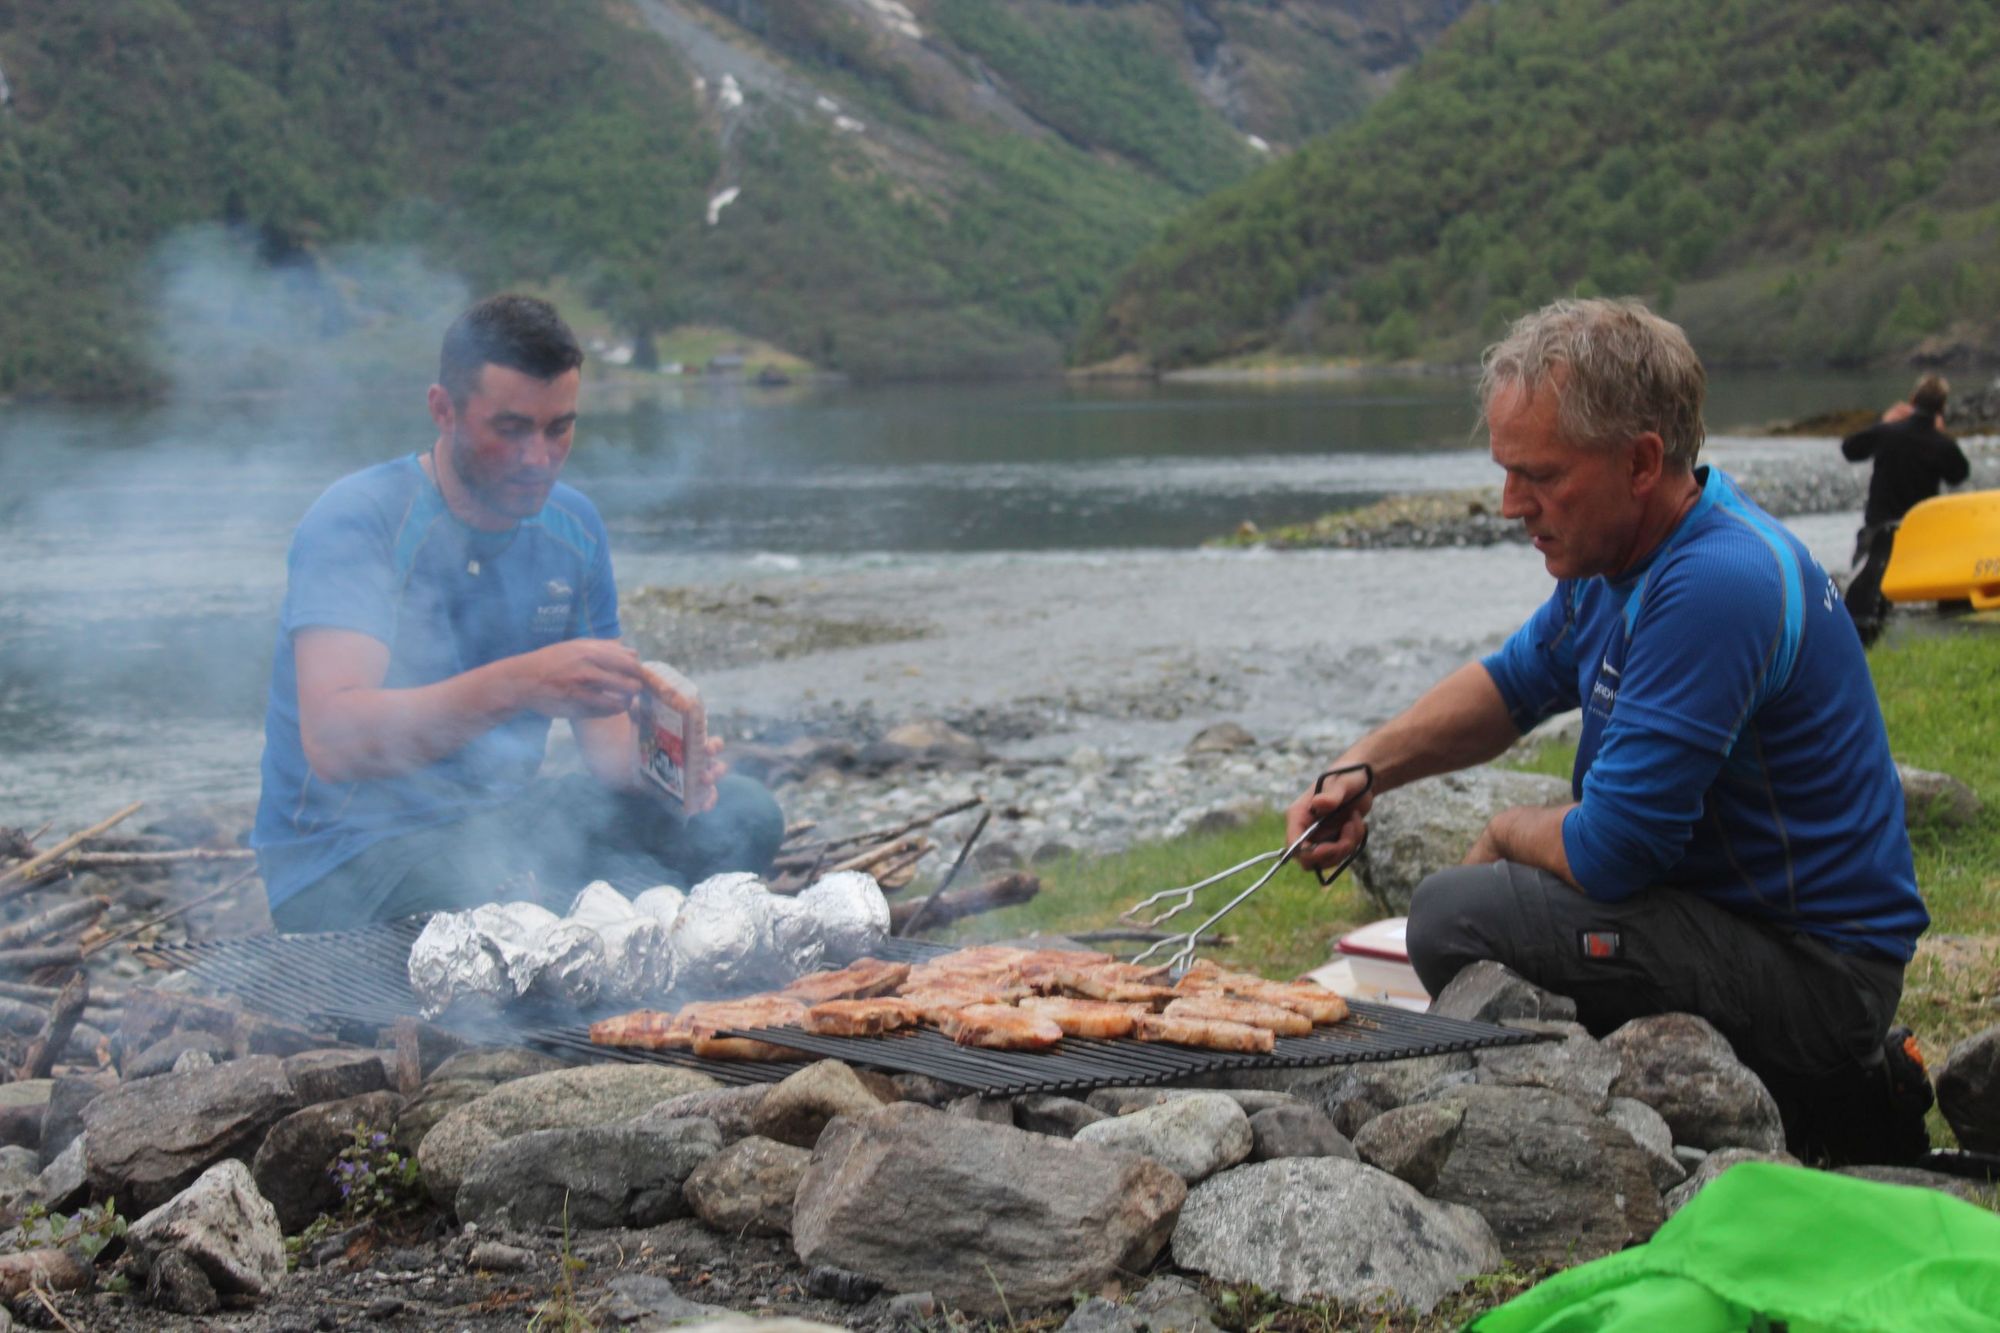 Jan and fellow guide Jordan grilling up meat and veggie options for dinner. 